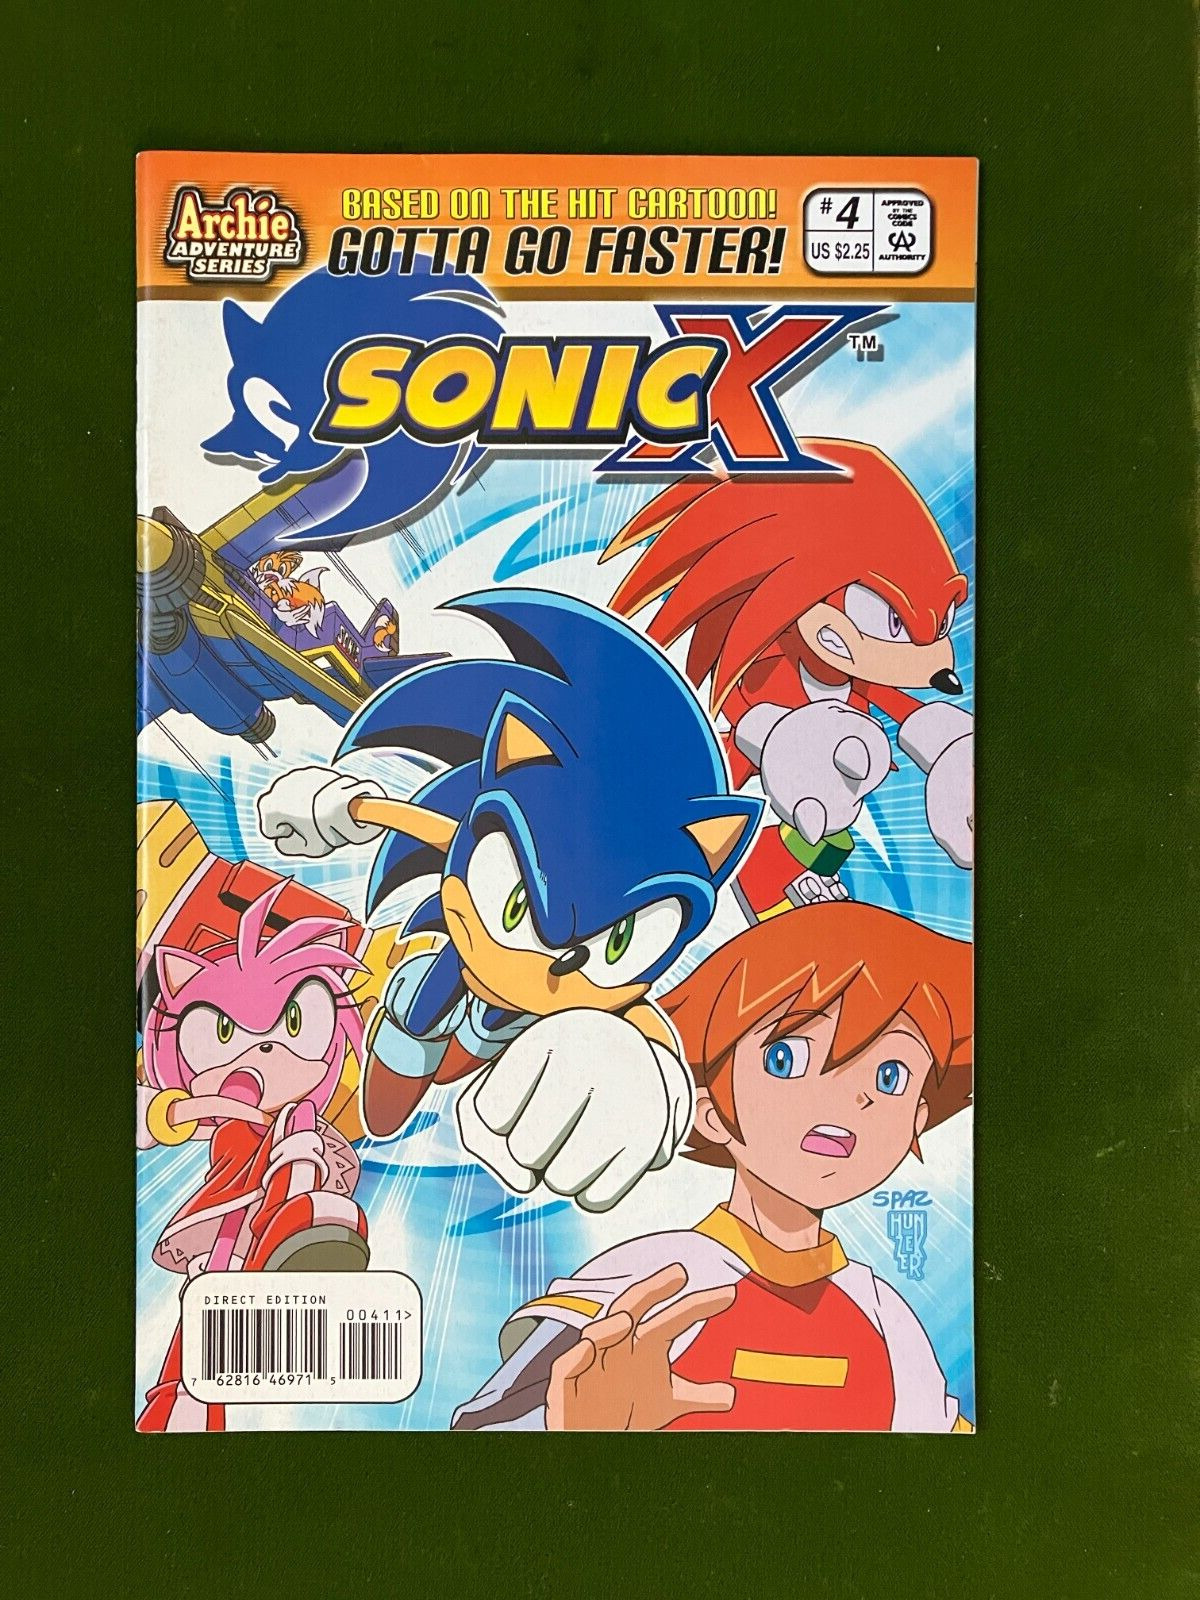 SONIC X HEDGEHOG Comic Book #4 February 2006 First Edition Bagged & Boarded NM